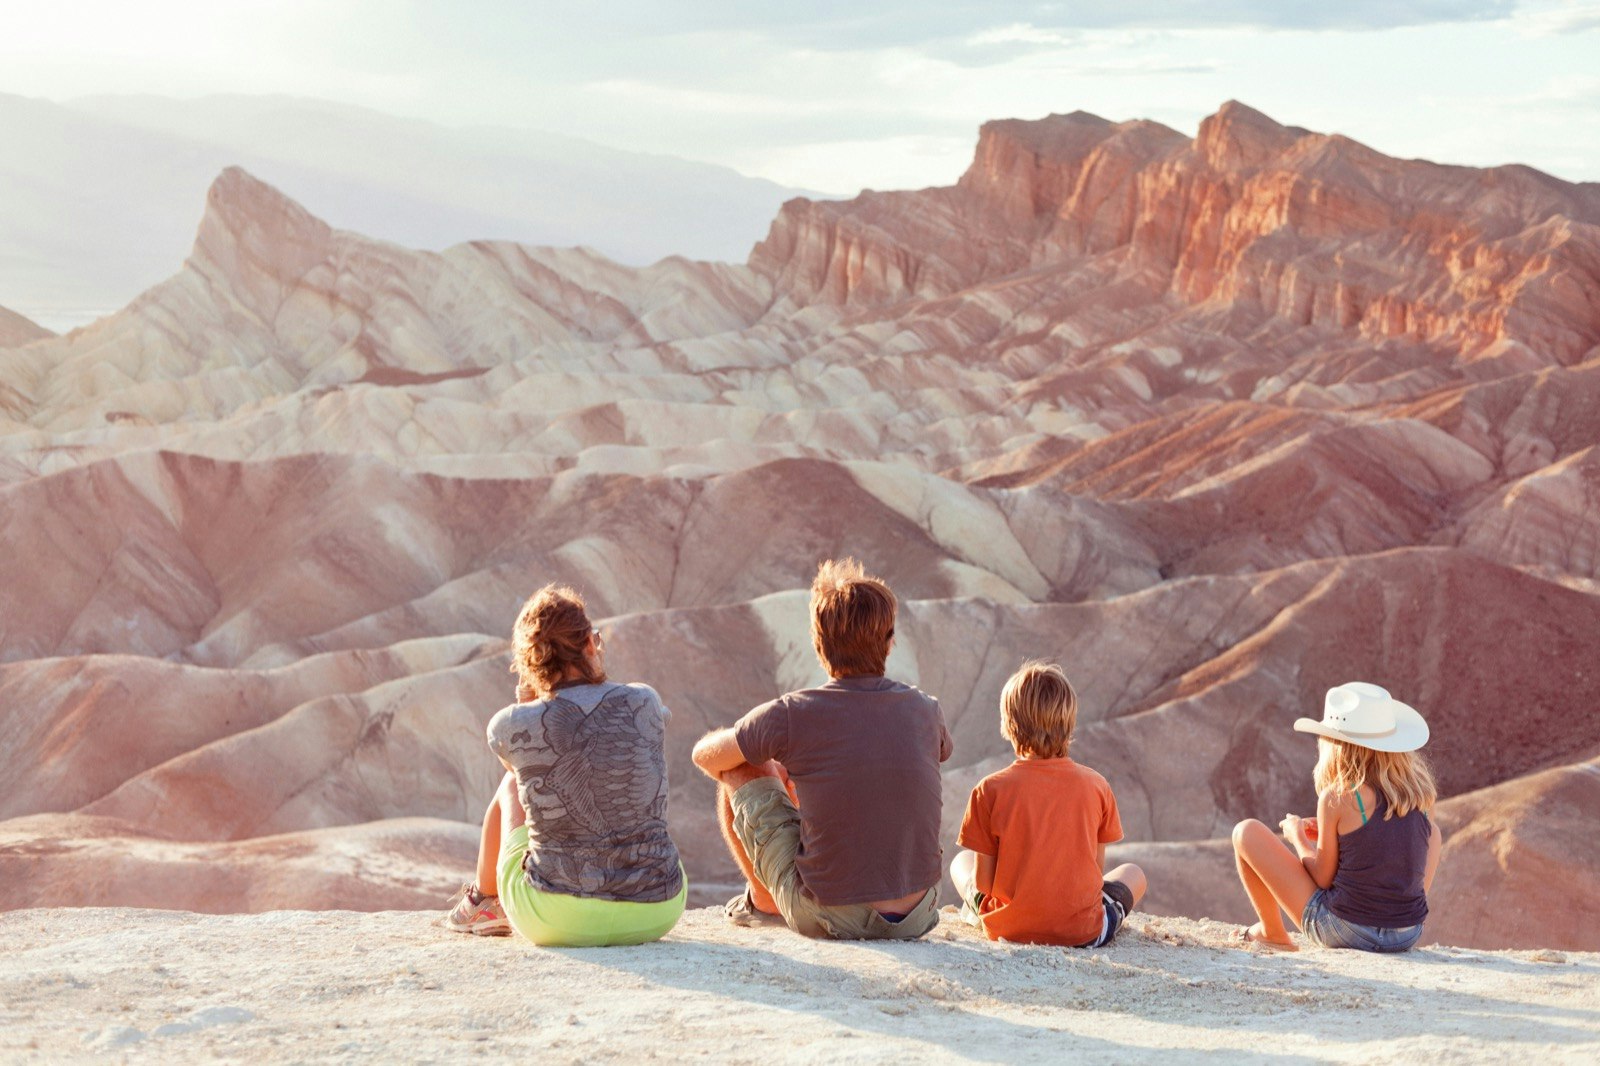 a family admires the view of canyons in Death Valley National Park